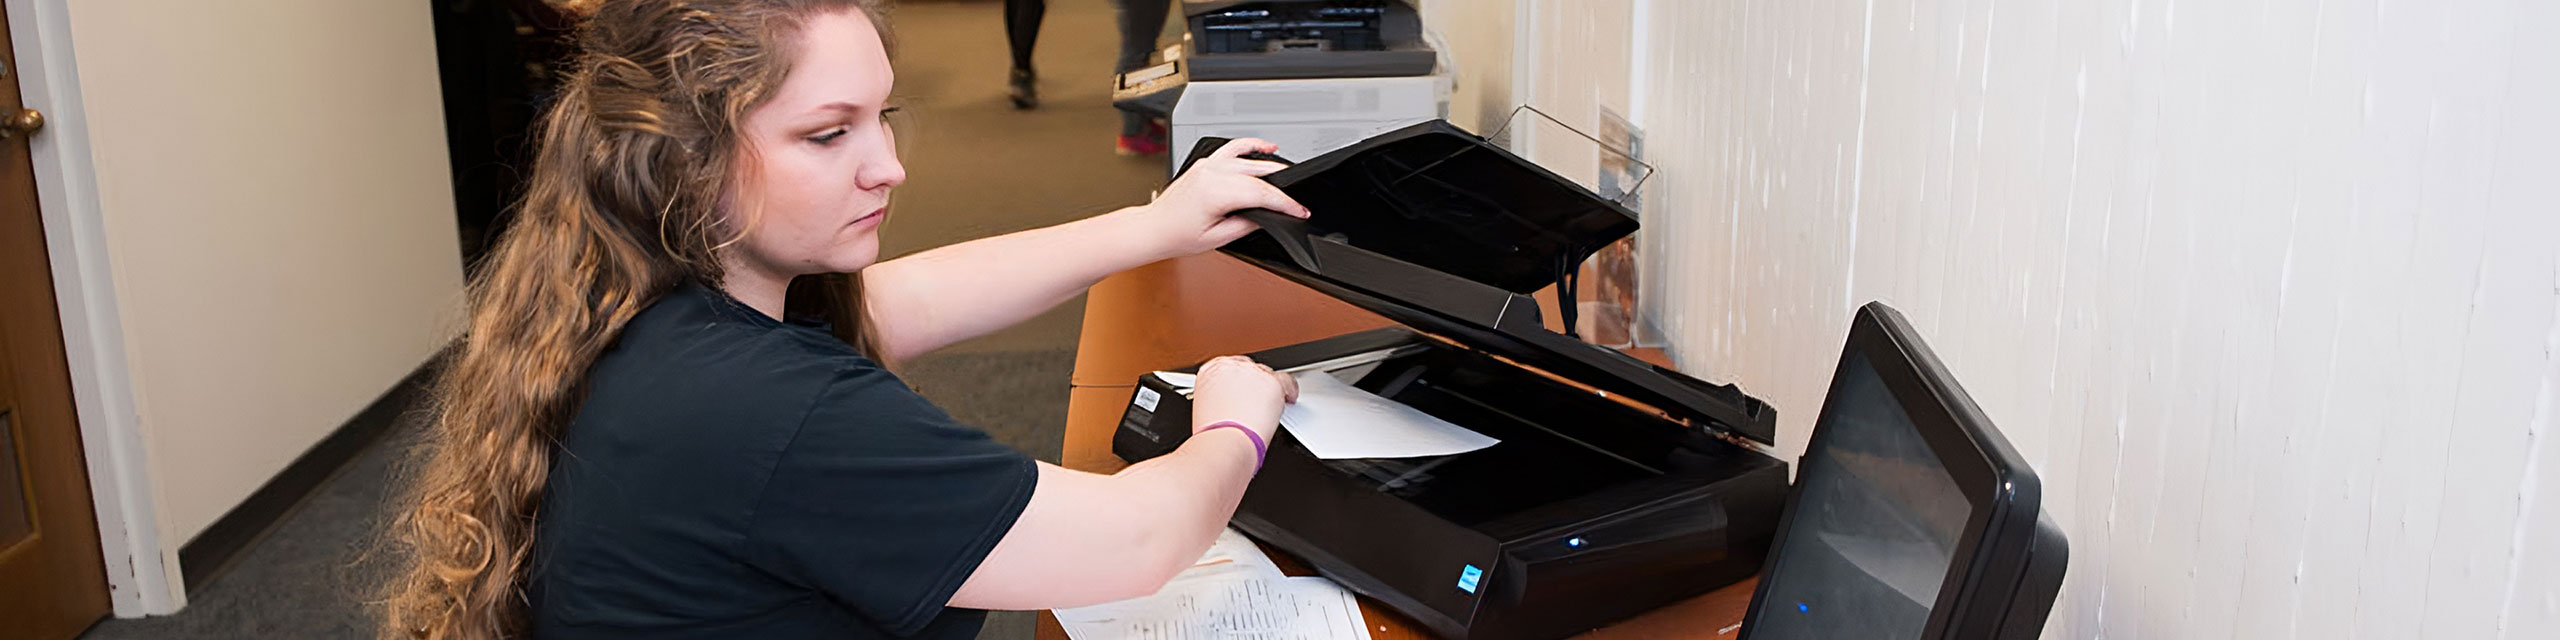 A student scanning a document in Milner.